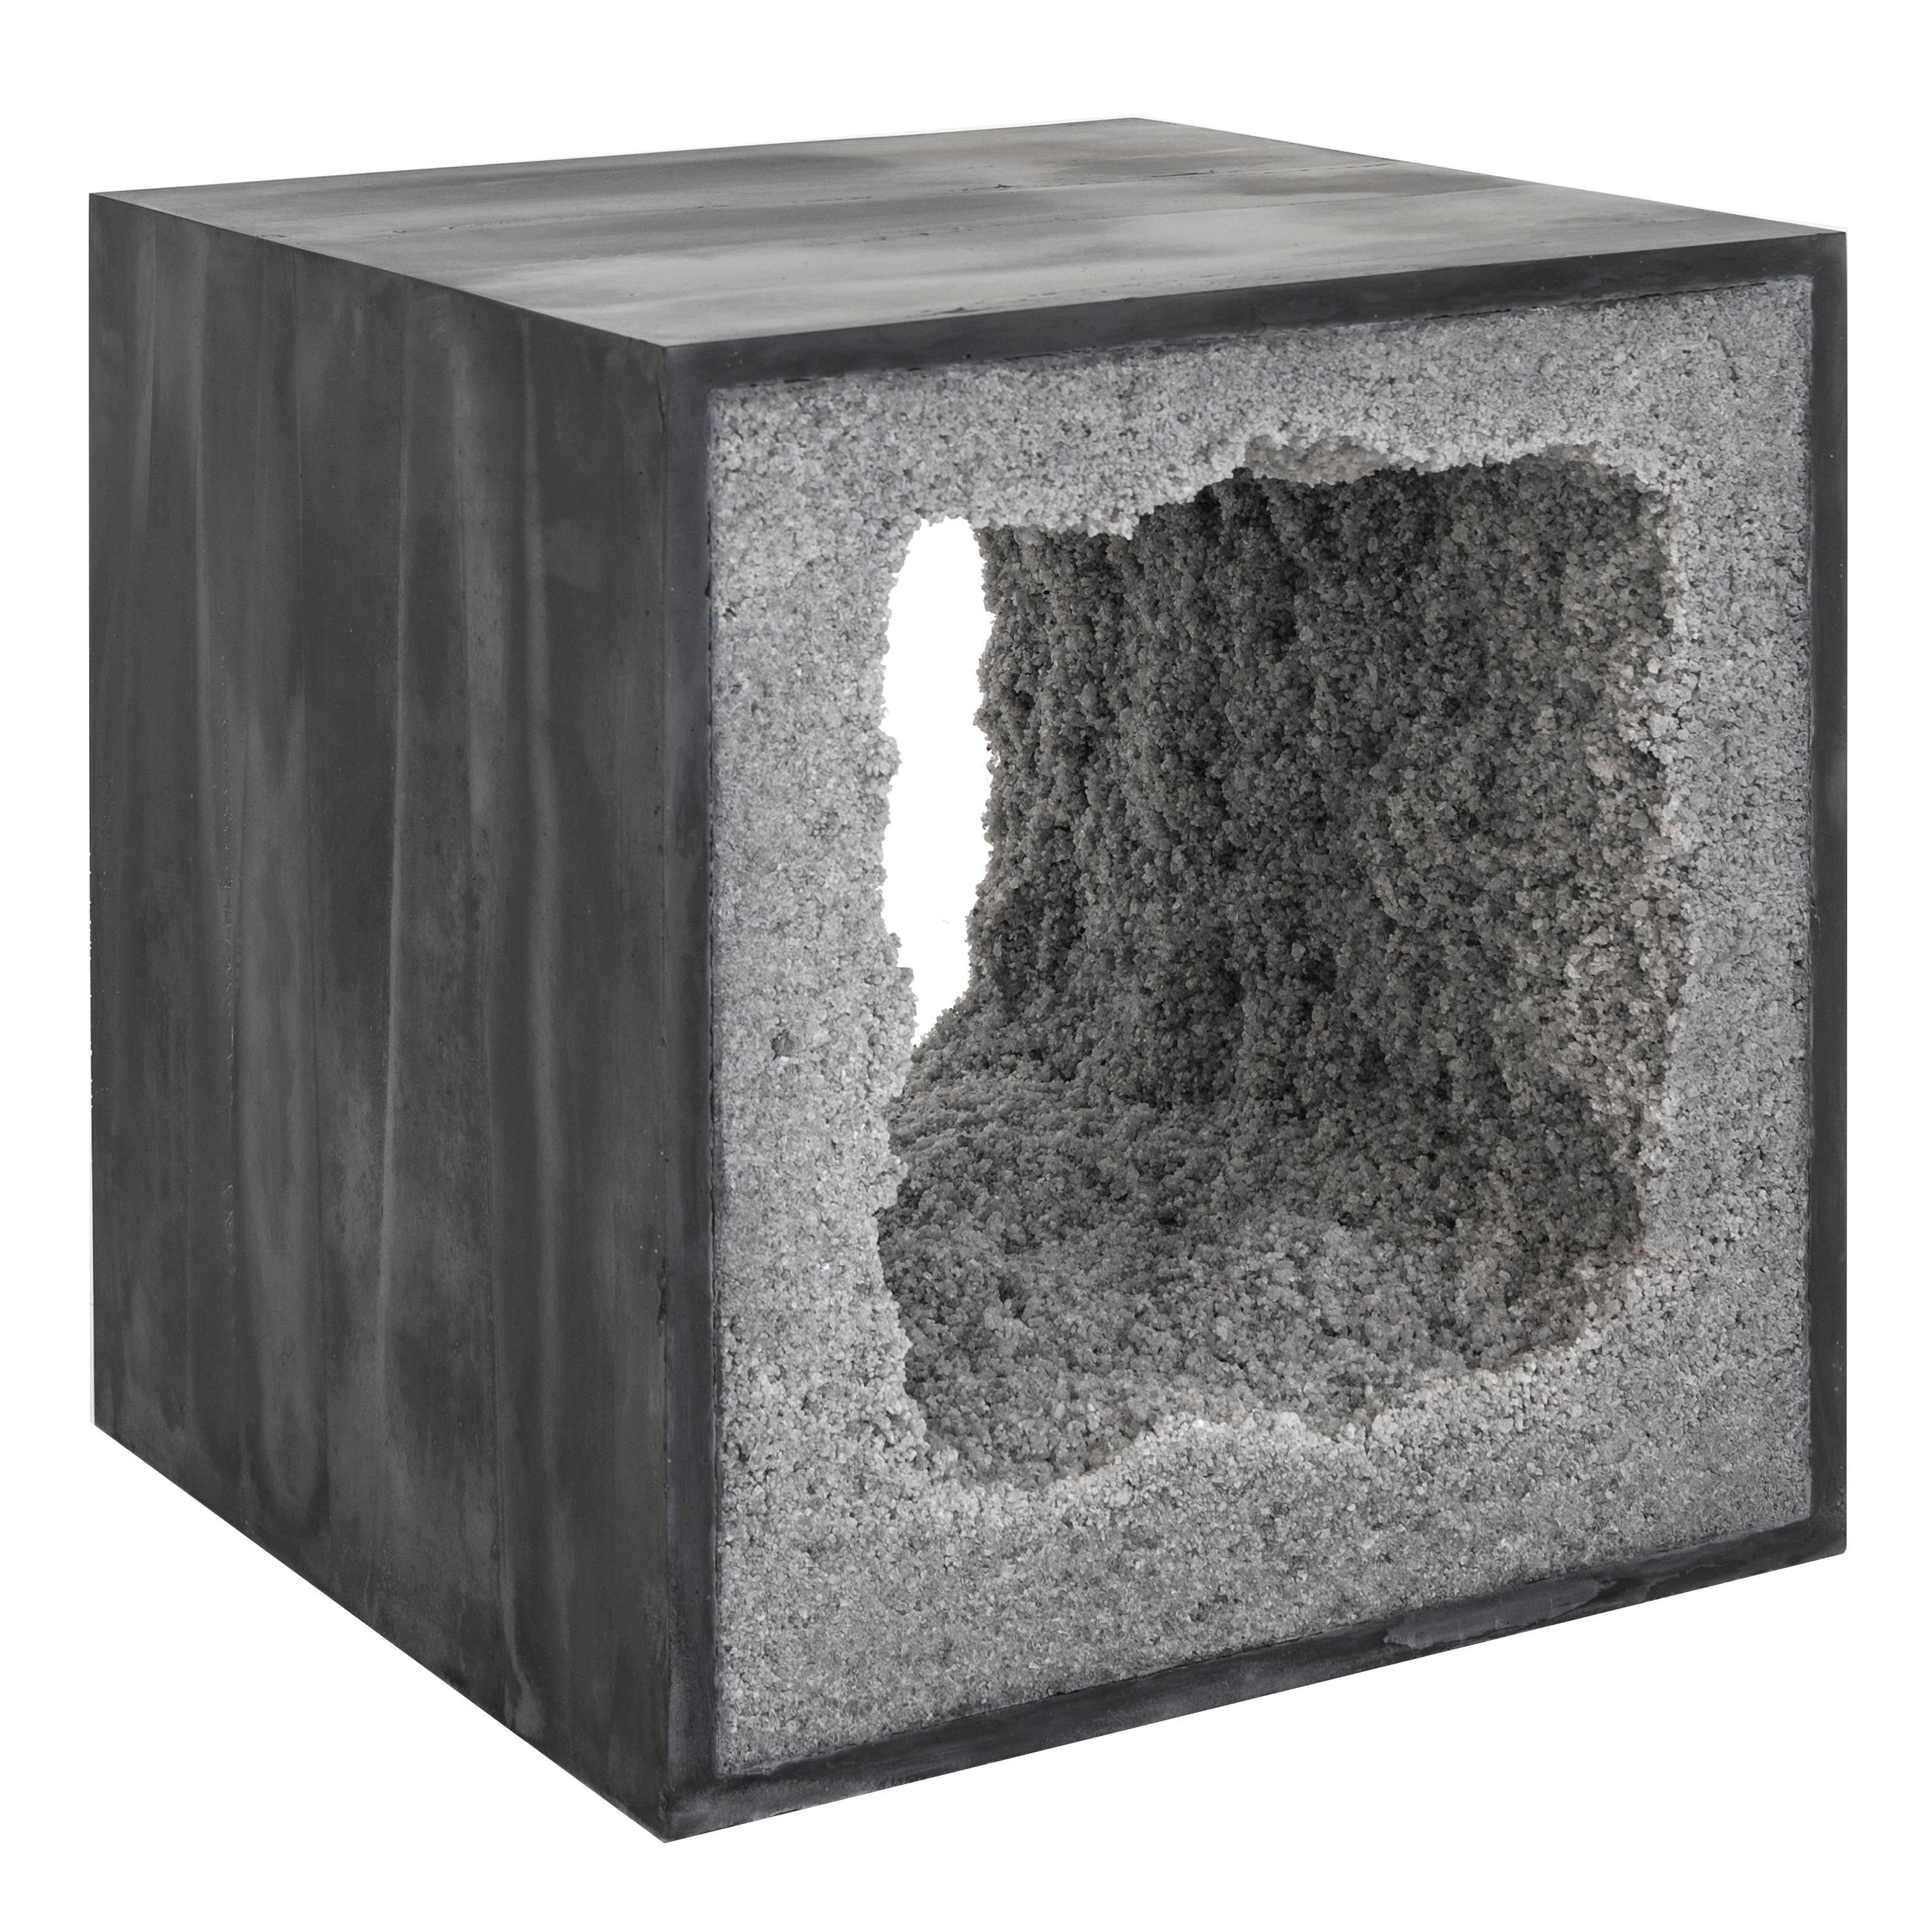 Black Cement and Rock Salt Table by Fernando Mastrangelo For Sale